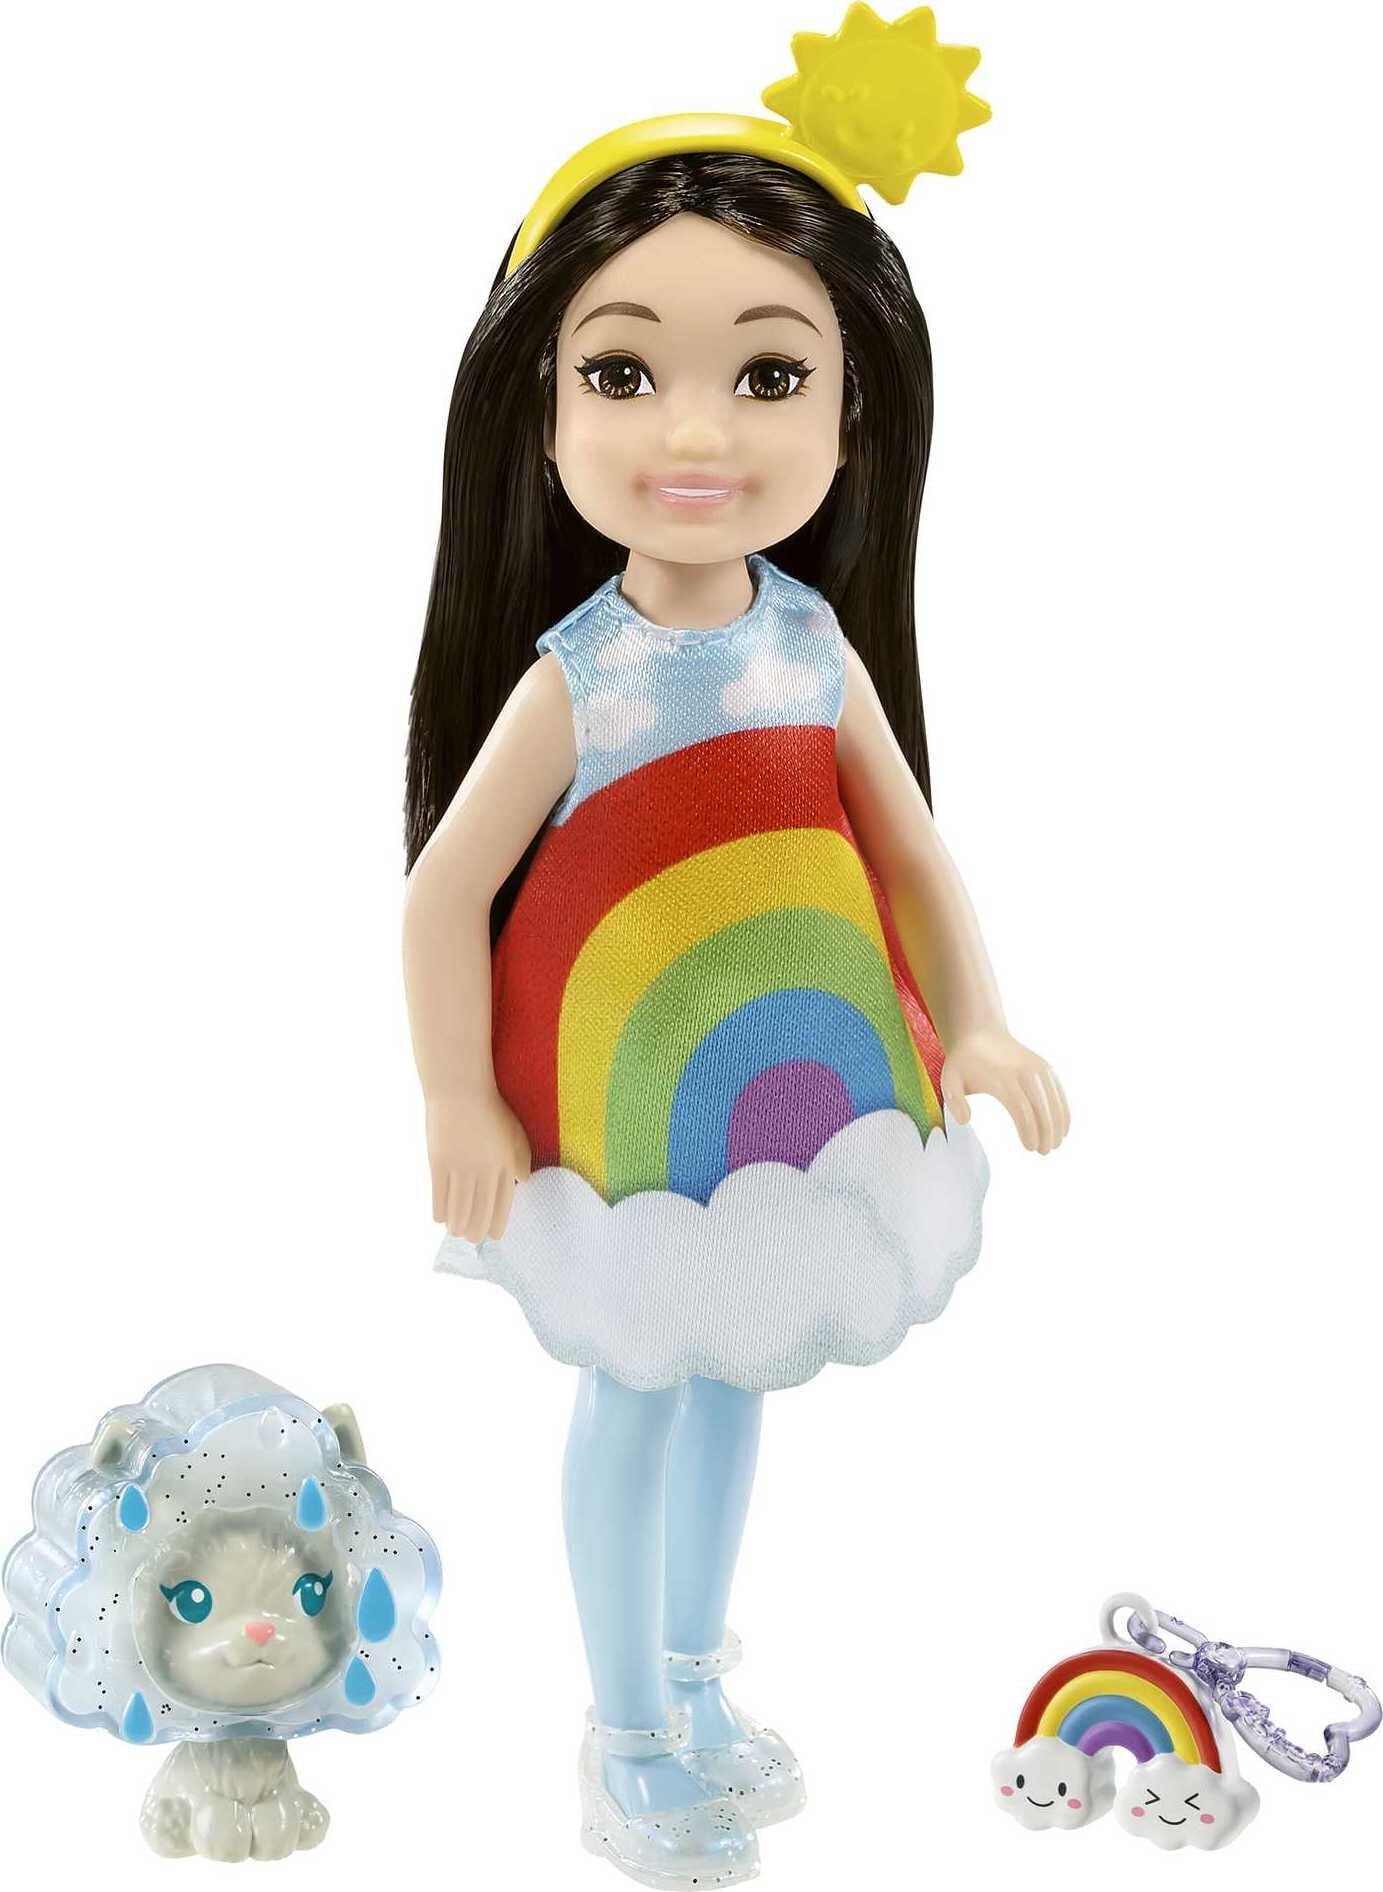 Barbie Chelsea Doll, Brunette Small Doll with Rainbow Costume, Pet